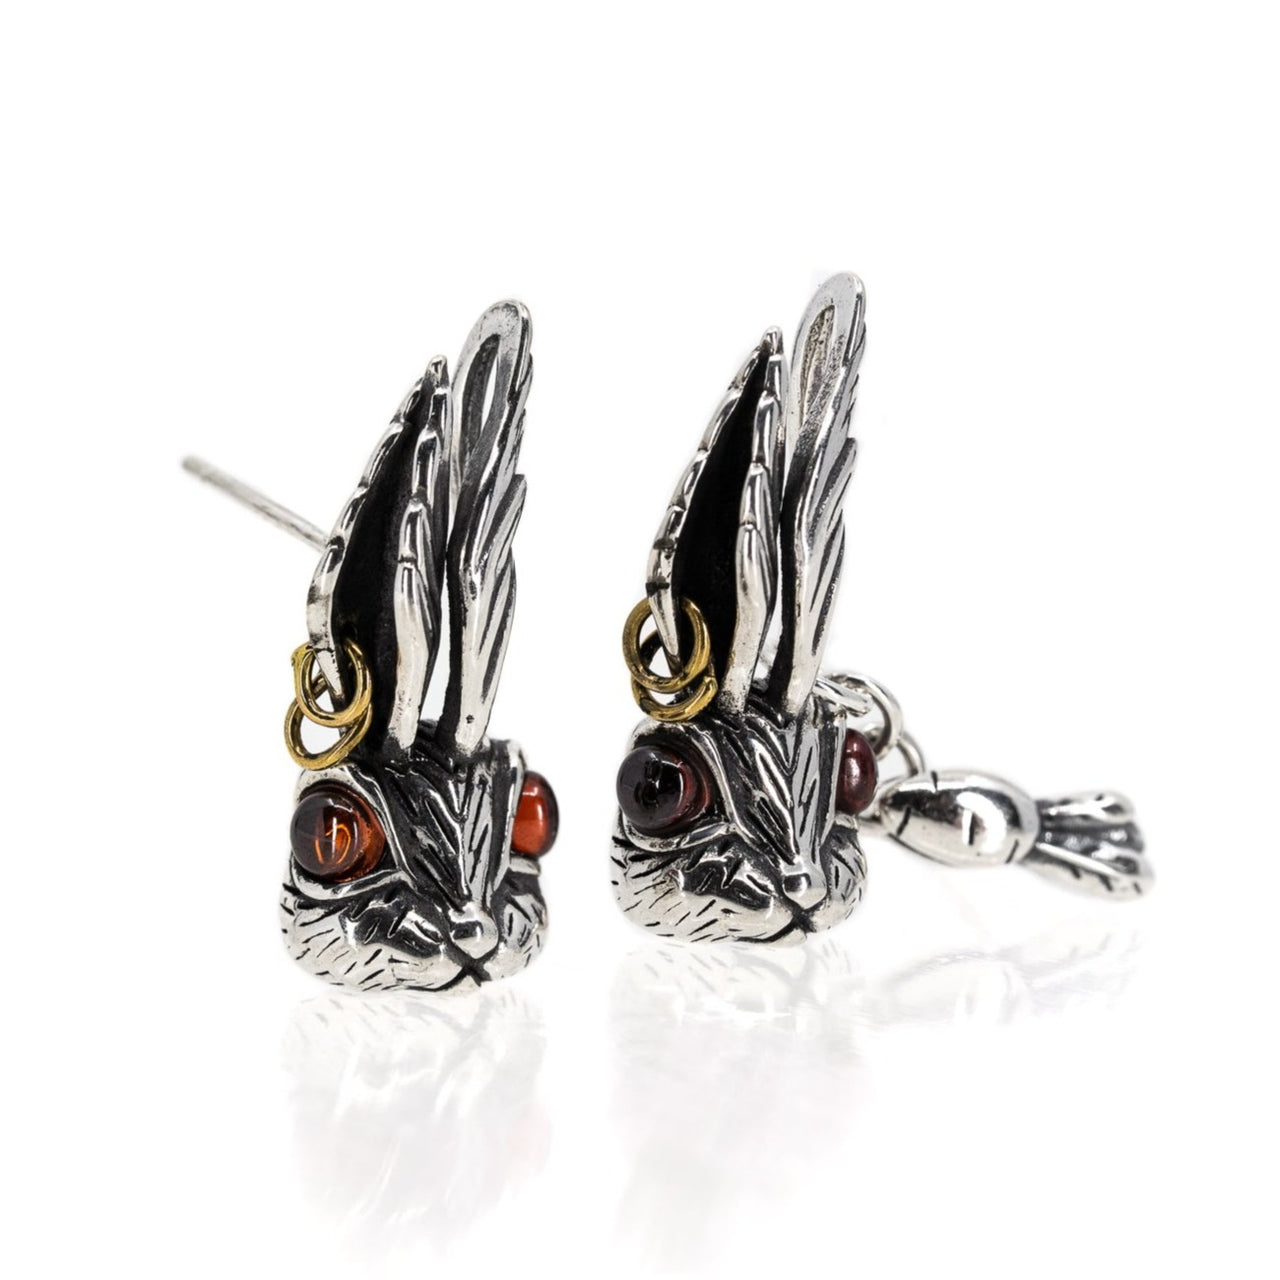 925 Sterling Silver Rabbit Earrings with red eyes and gold details - Black Feather Design